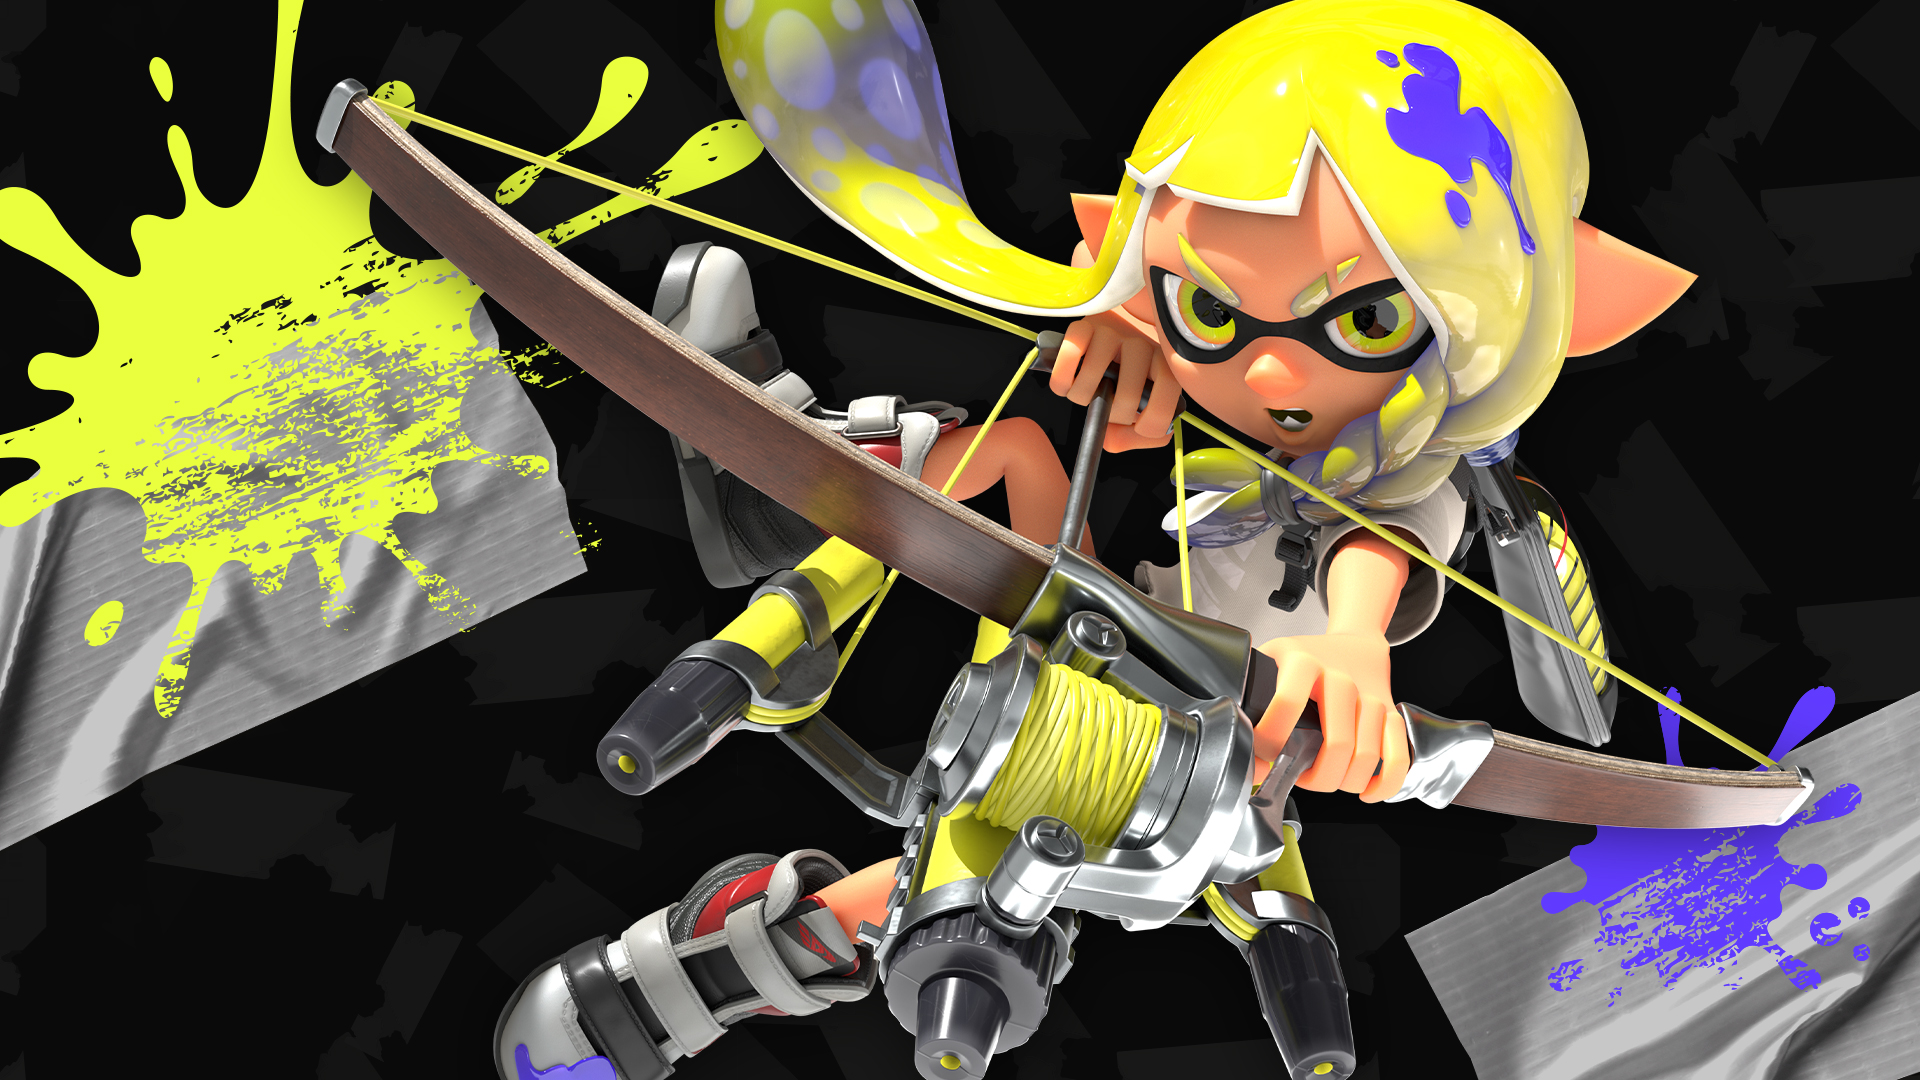 Splatoon North America Next Up We Ve Obtained Imagery Of A New Class Of Weapon Known As The Stringer It Seems Stringers Can Fire Ink Horizontally Or Vertically Depending On Whether They